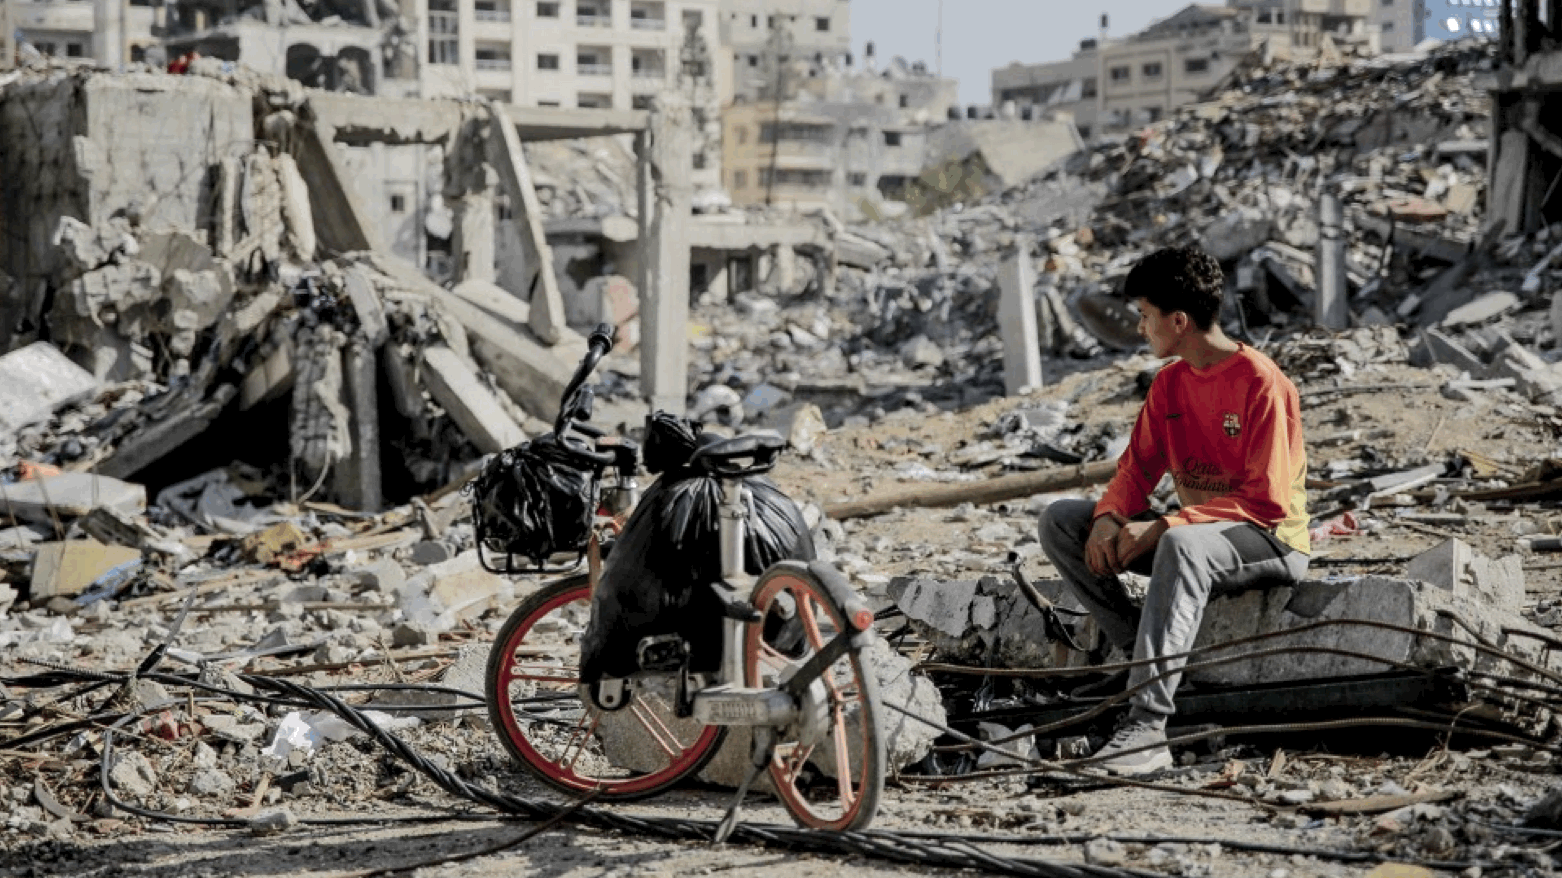 A Palestinian youth sits next to his bicycle amid the rubble of destroyed buildings in Gaza City (Photo: Omar El-Qattaa/AFP)